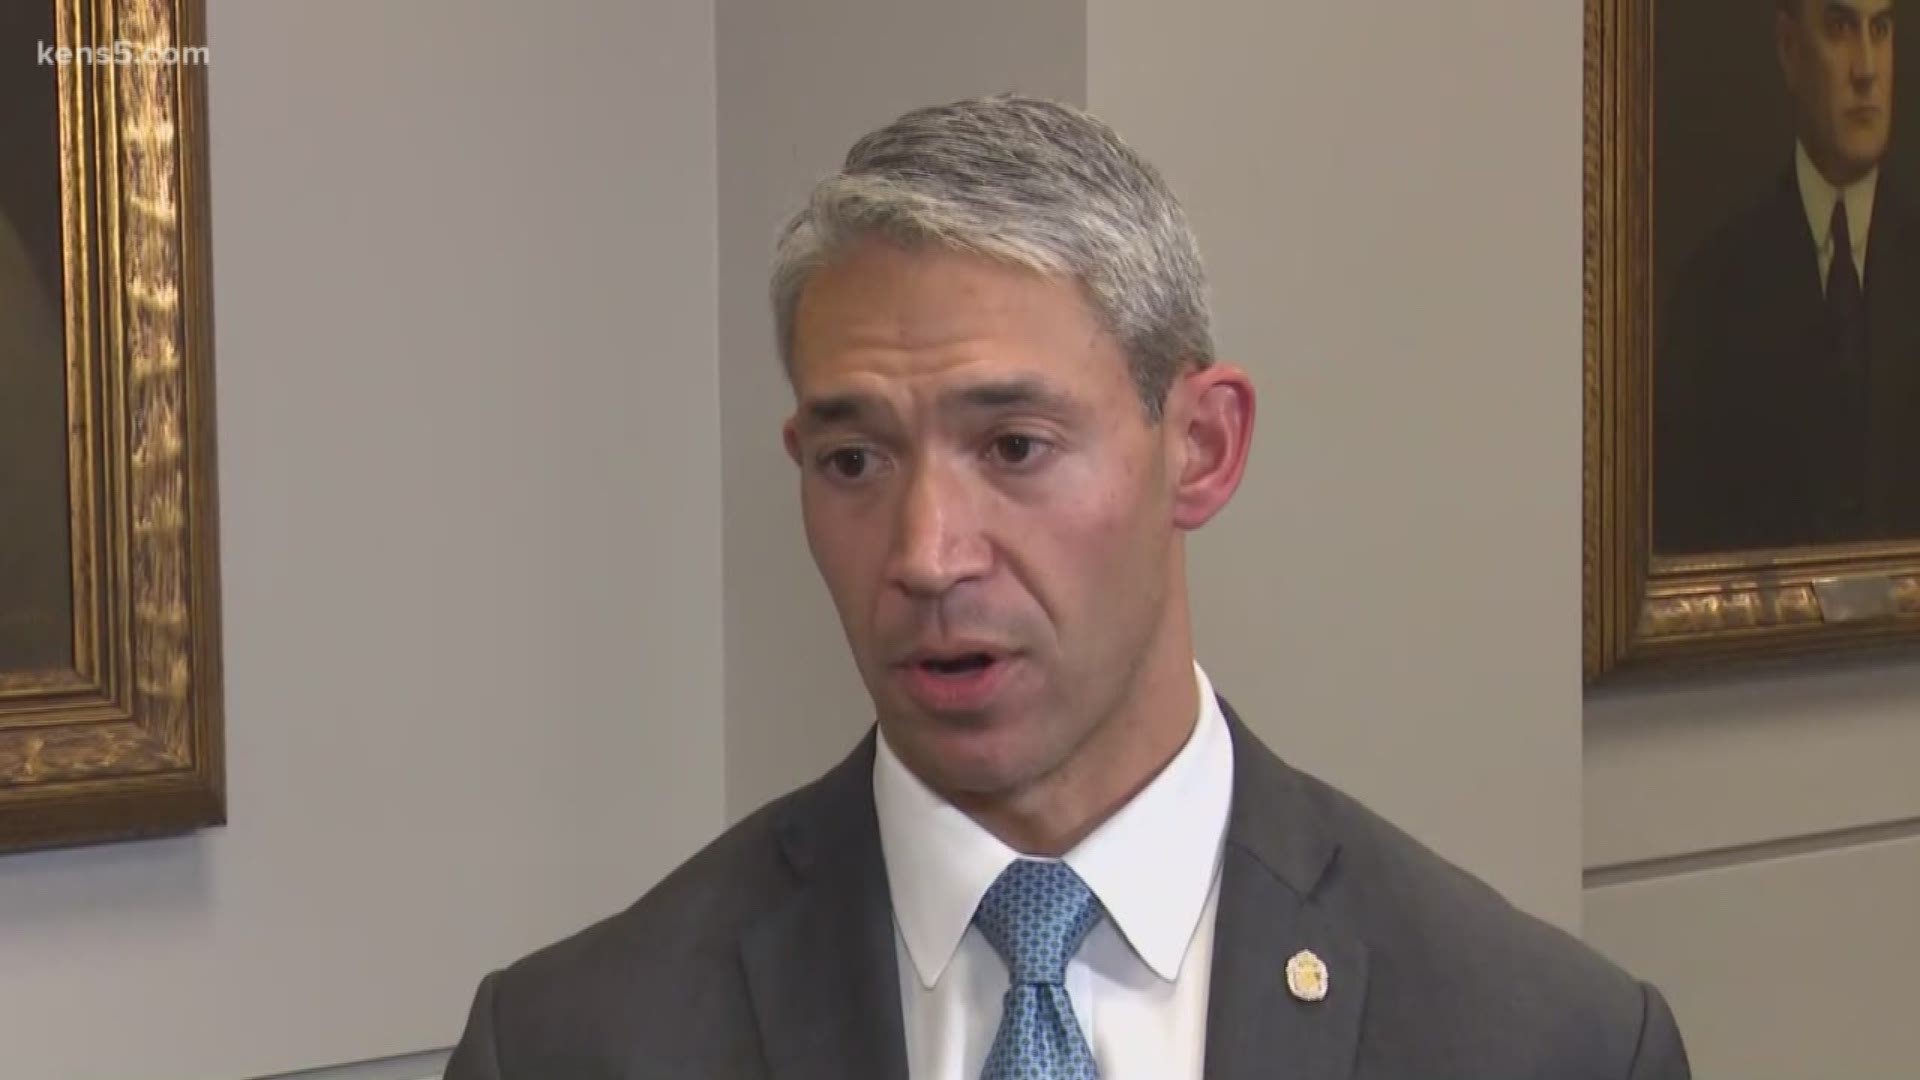 "We want to be on the front end of prevention efforts so as to delay, and prevent, and ultimately contain any community spread," Mayor Nirenberg said.